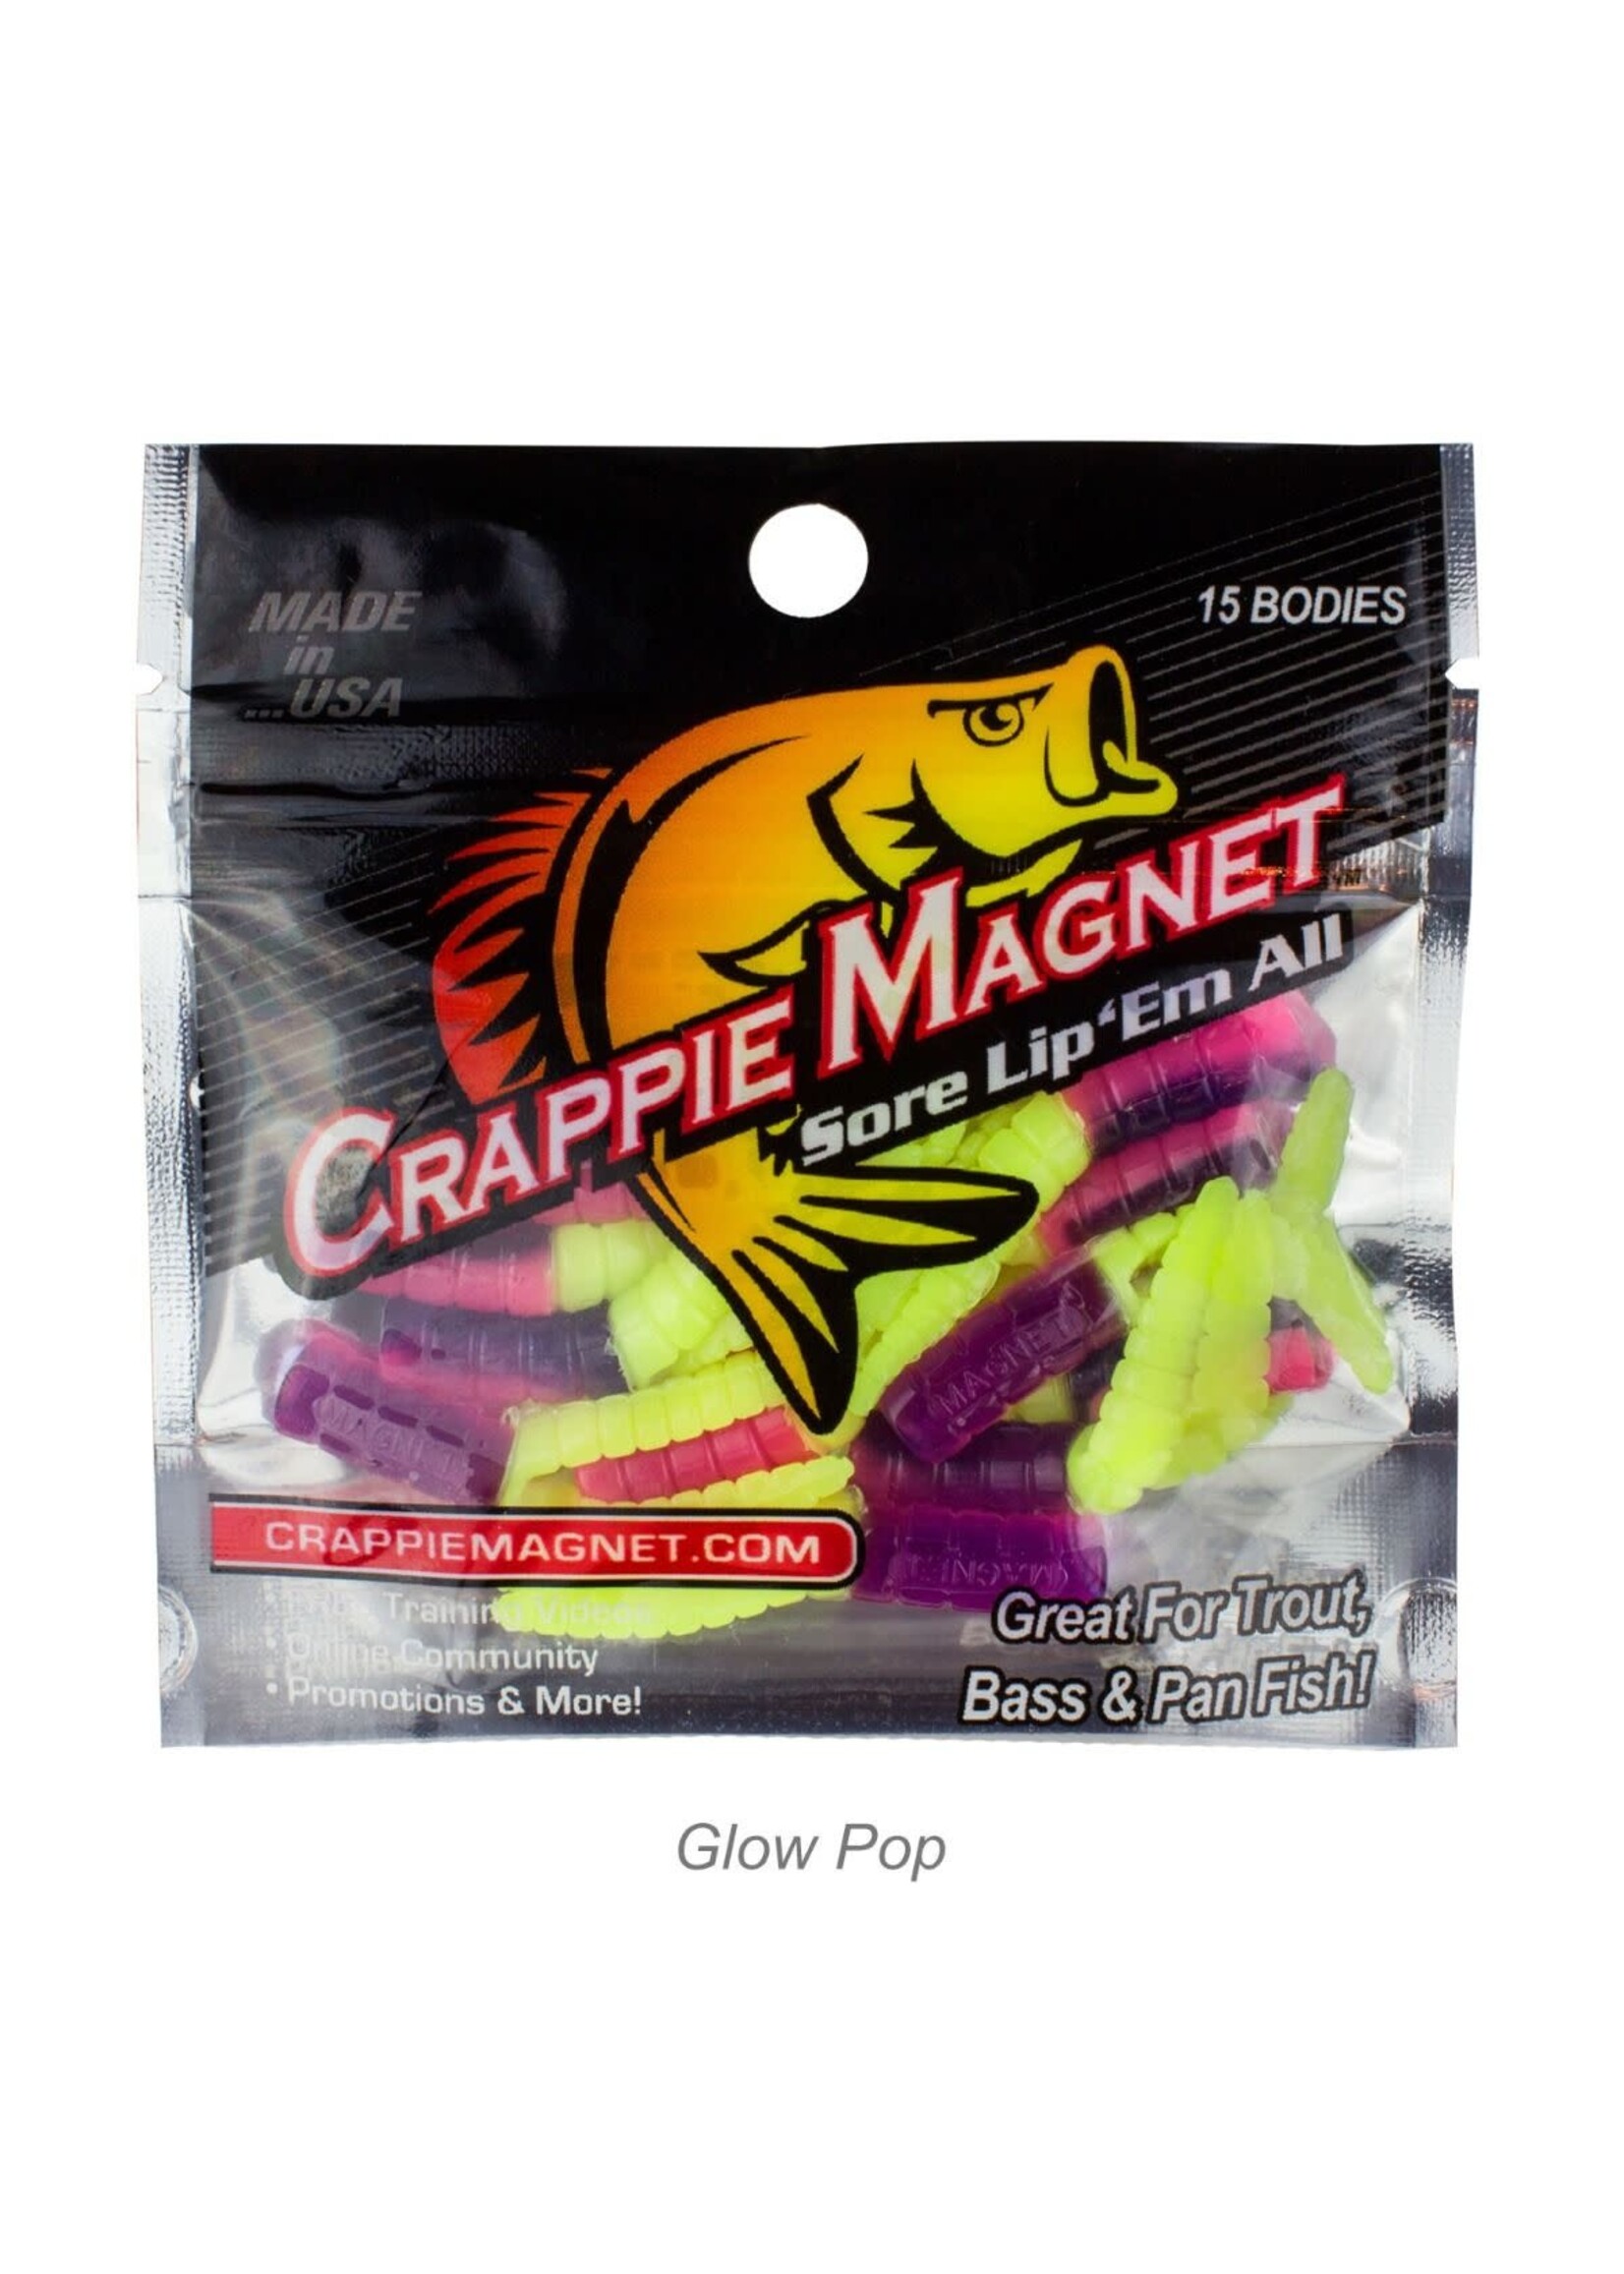 Search results for: 'bulk crappie magnets